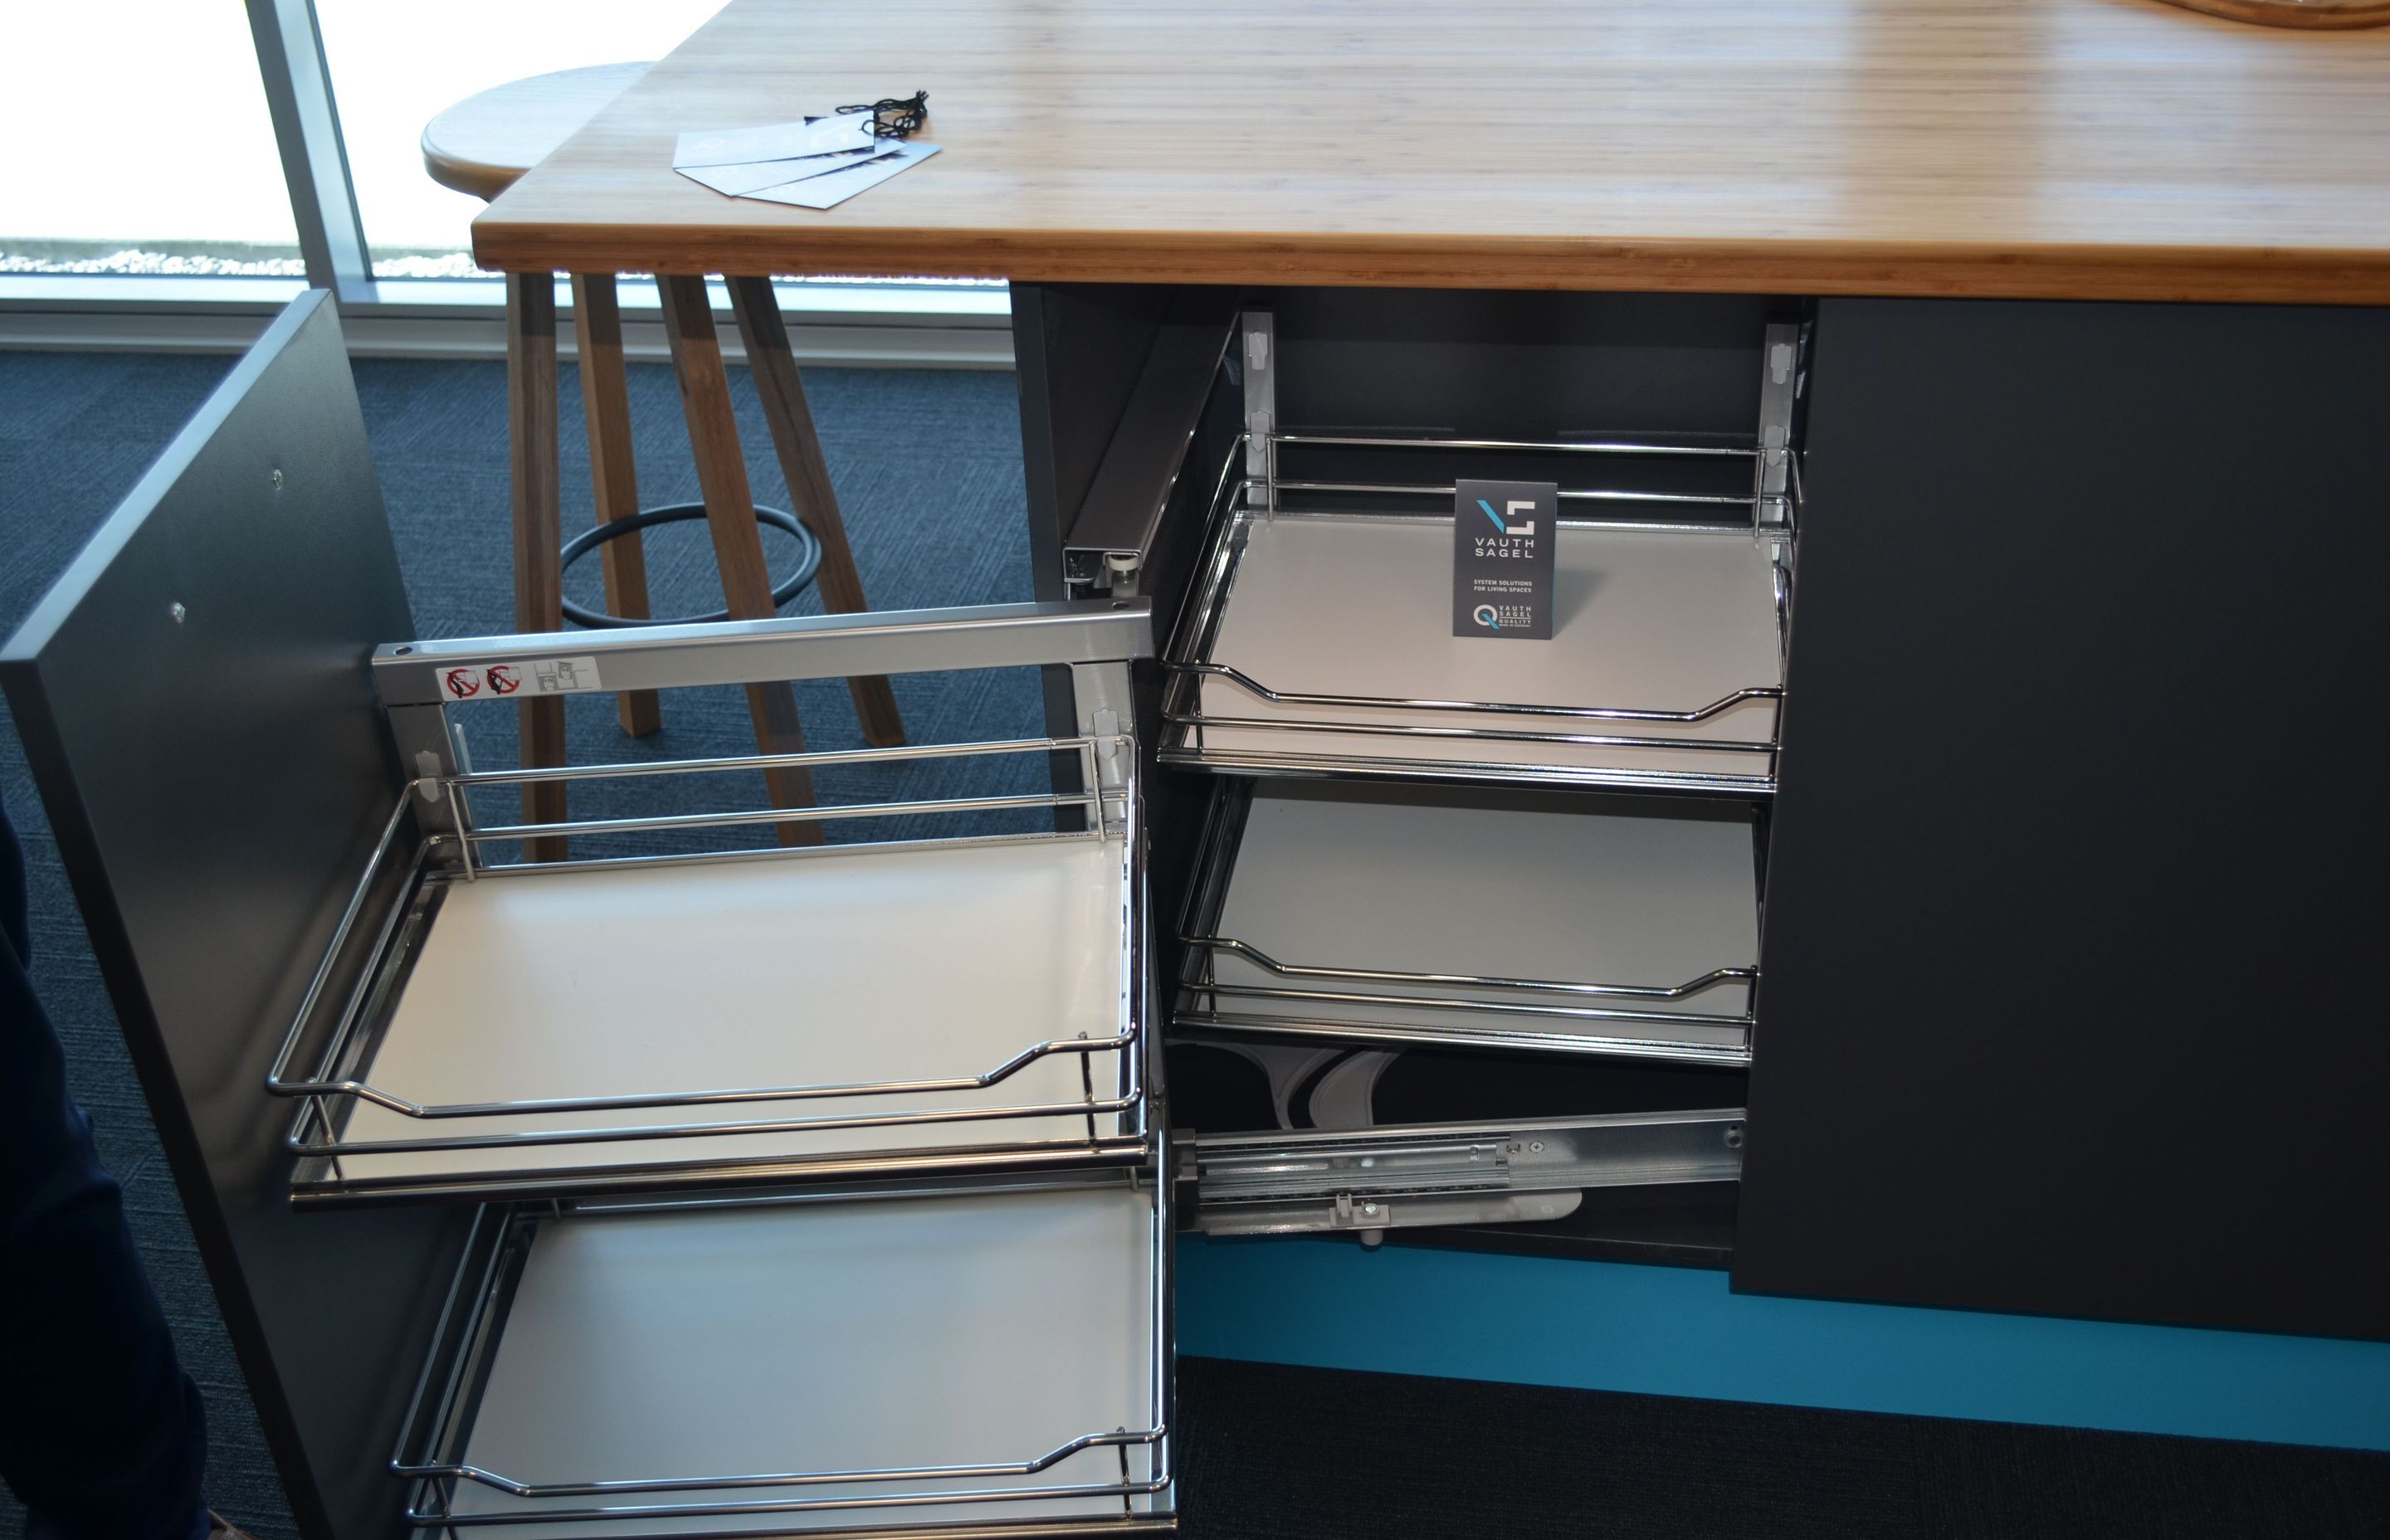 Fit Showroom Christchurch - Vauth Sagel COR Fold Unit for Blind Corner Cabinets. In Premea Style.